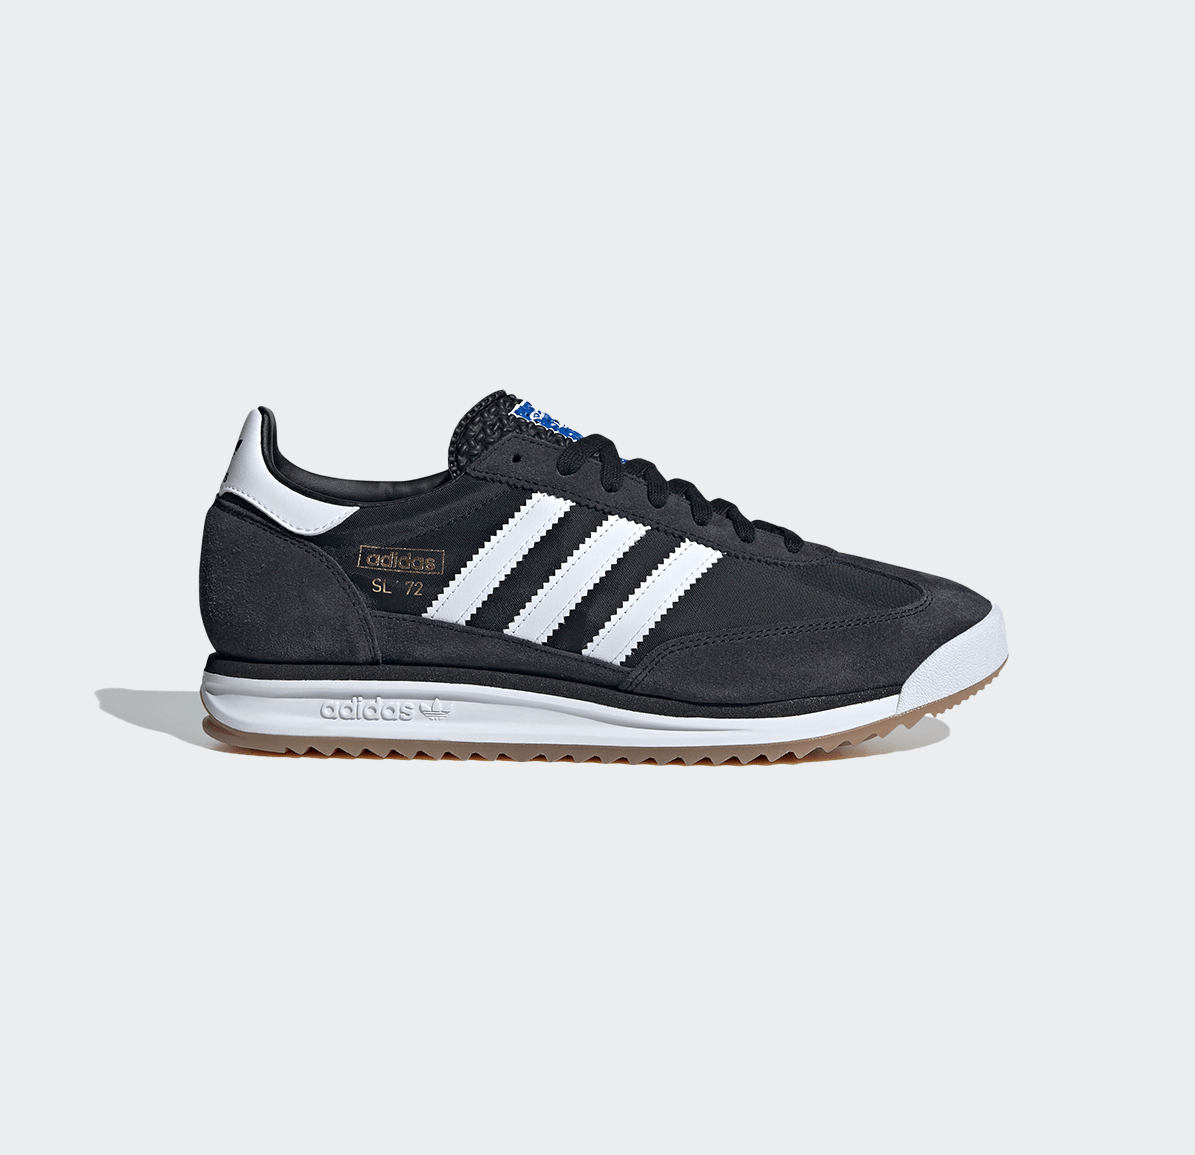 Adidas SL 72 RS - Core Black/Cloud White/Blue - Adidas - State Of Play